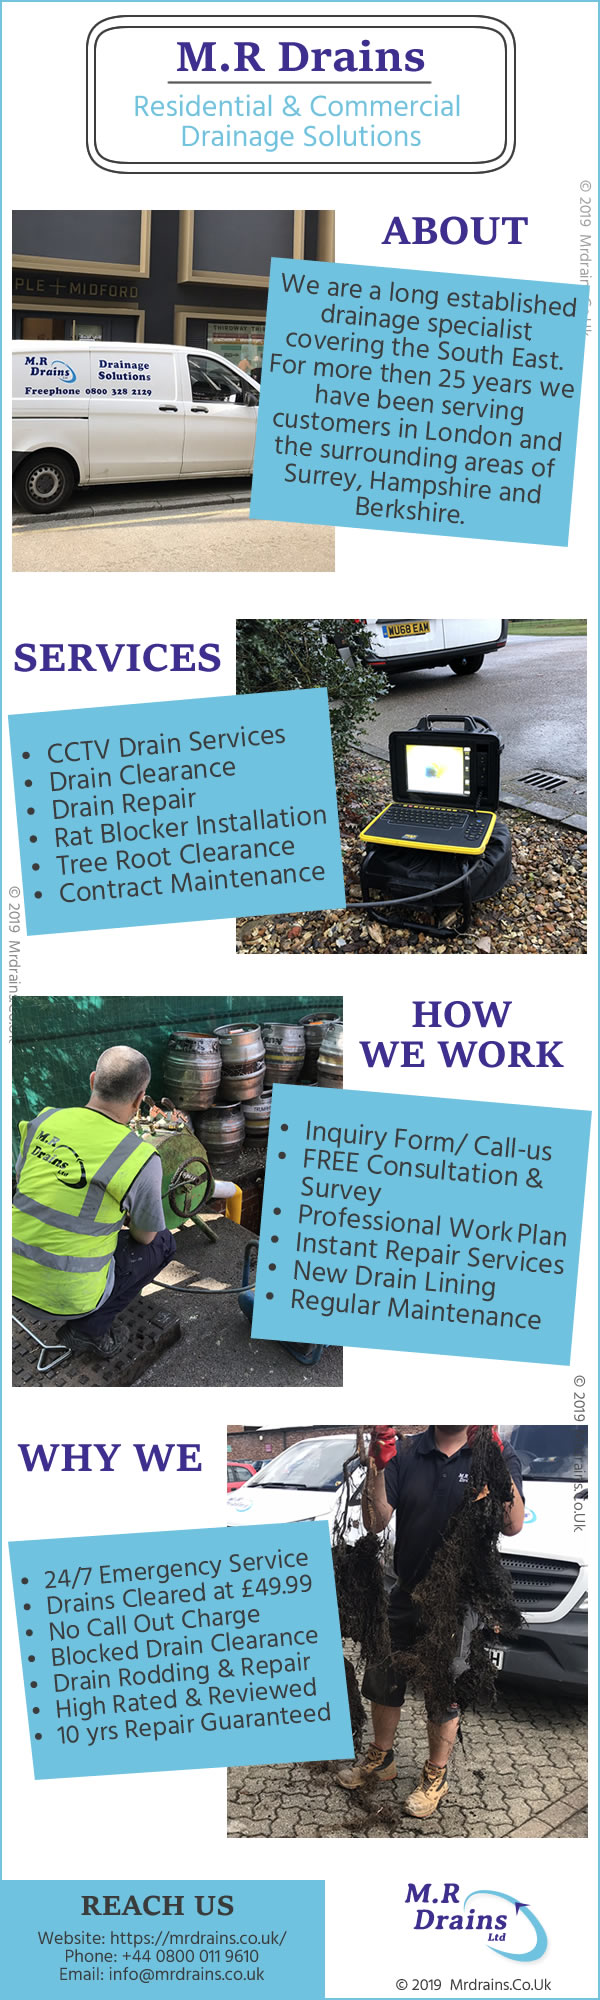 Residential & Commercial Drainage Services